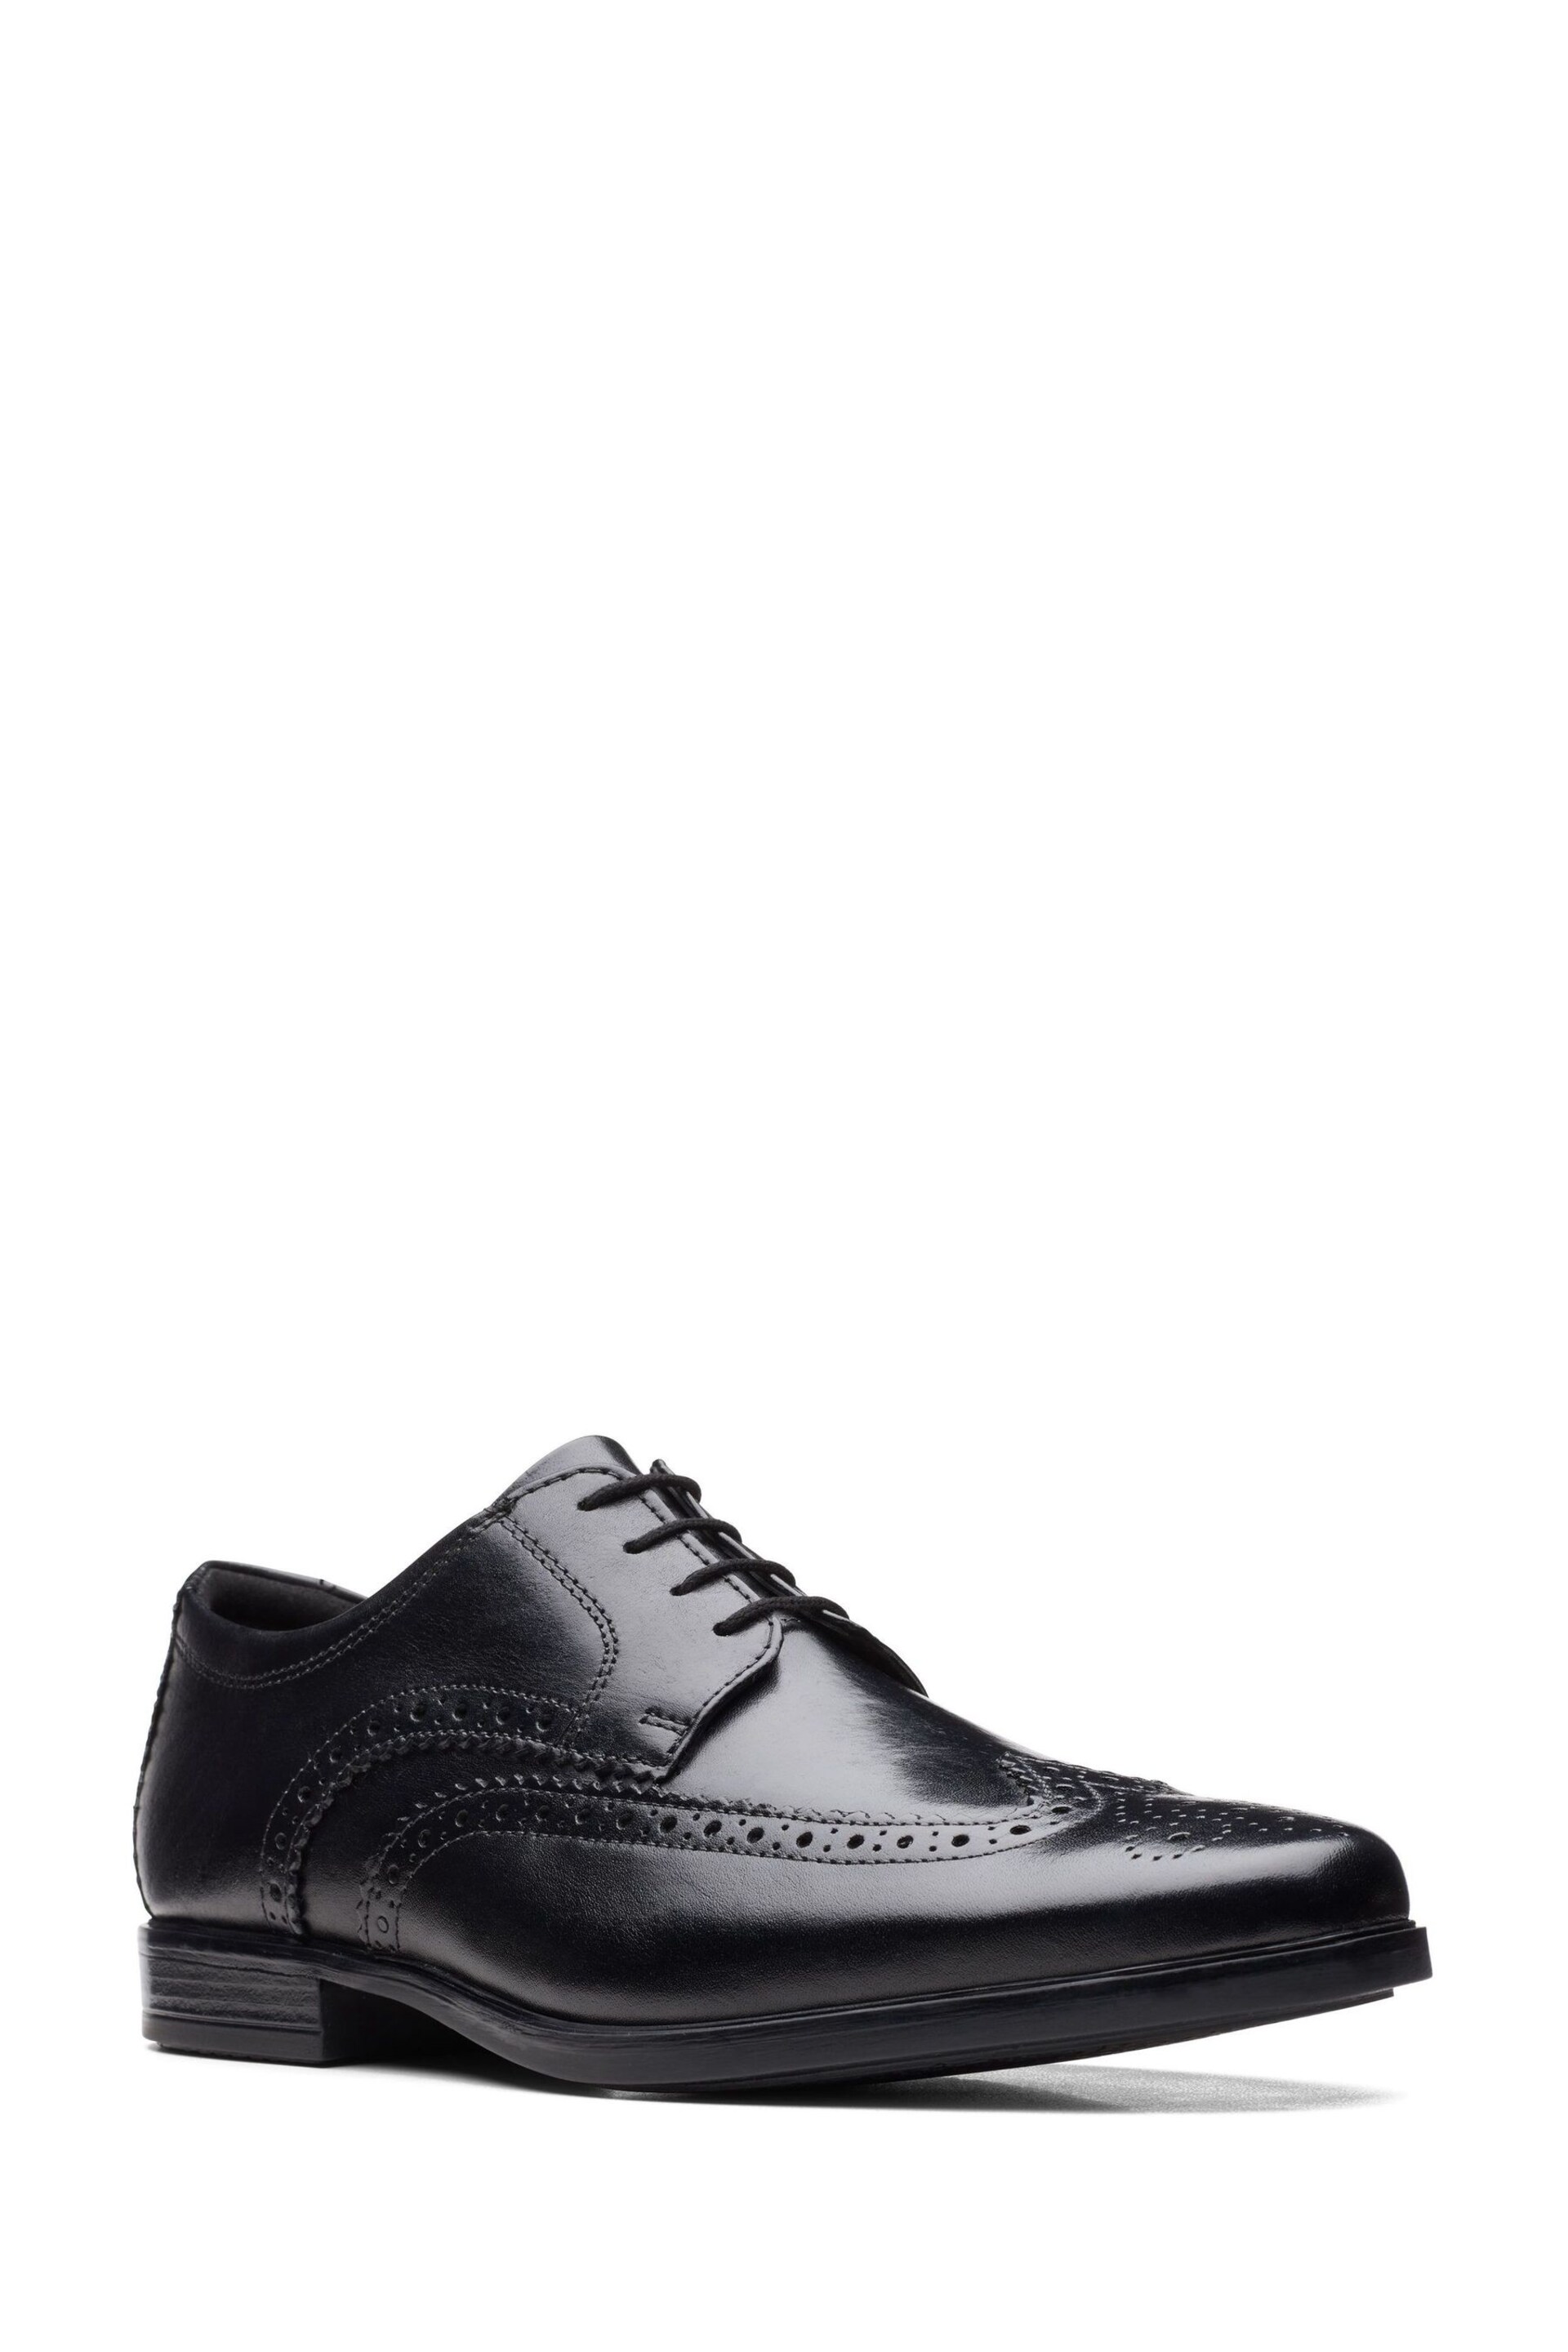 Clarks Black Leather Howard Wing Wide Fit Shoes - Image 5 of 7